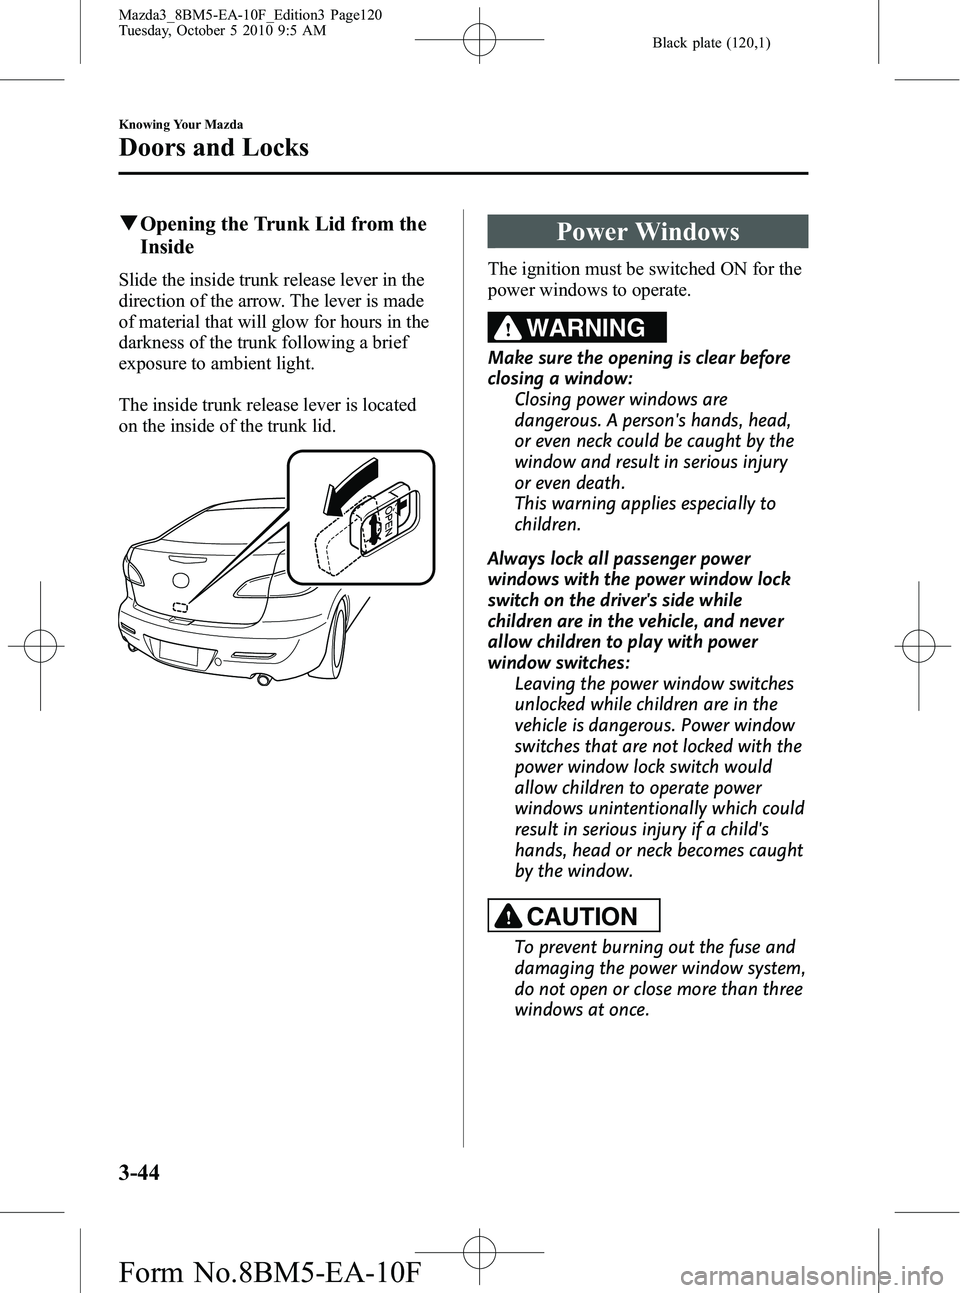 MAZDA MODEL 3 4-DOOR 2011  Owners Manual Black plate (120,1)
qOpening the Trunk Lid from the
Inside
Slide the inside trunk release lever in the
direction of the arrow. The lever is made
of material that will glow for hours in the
darkness of